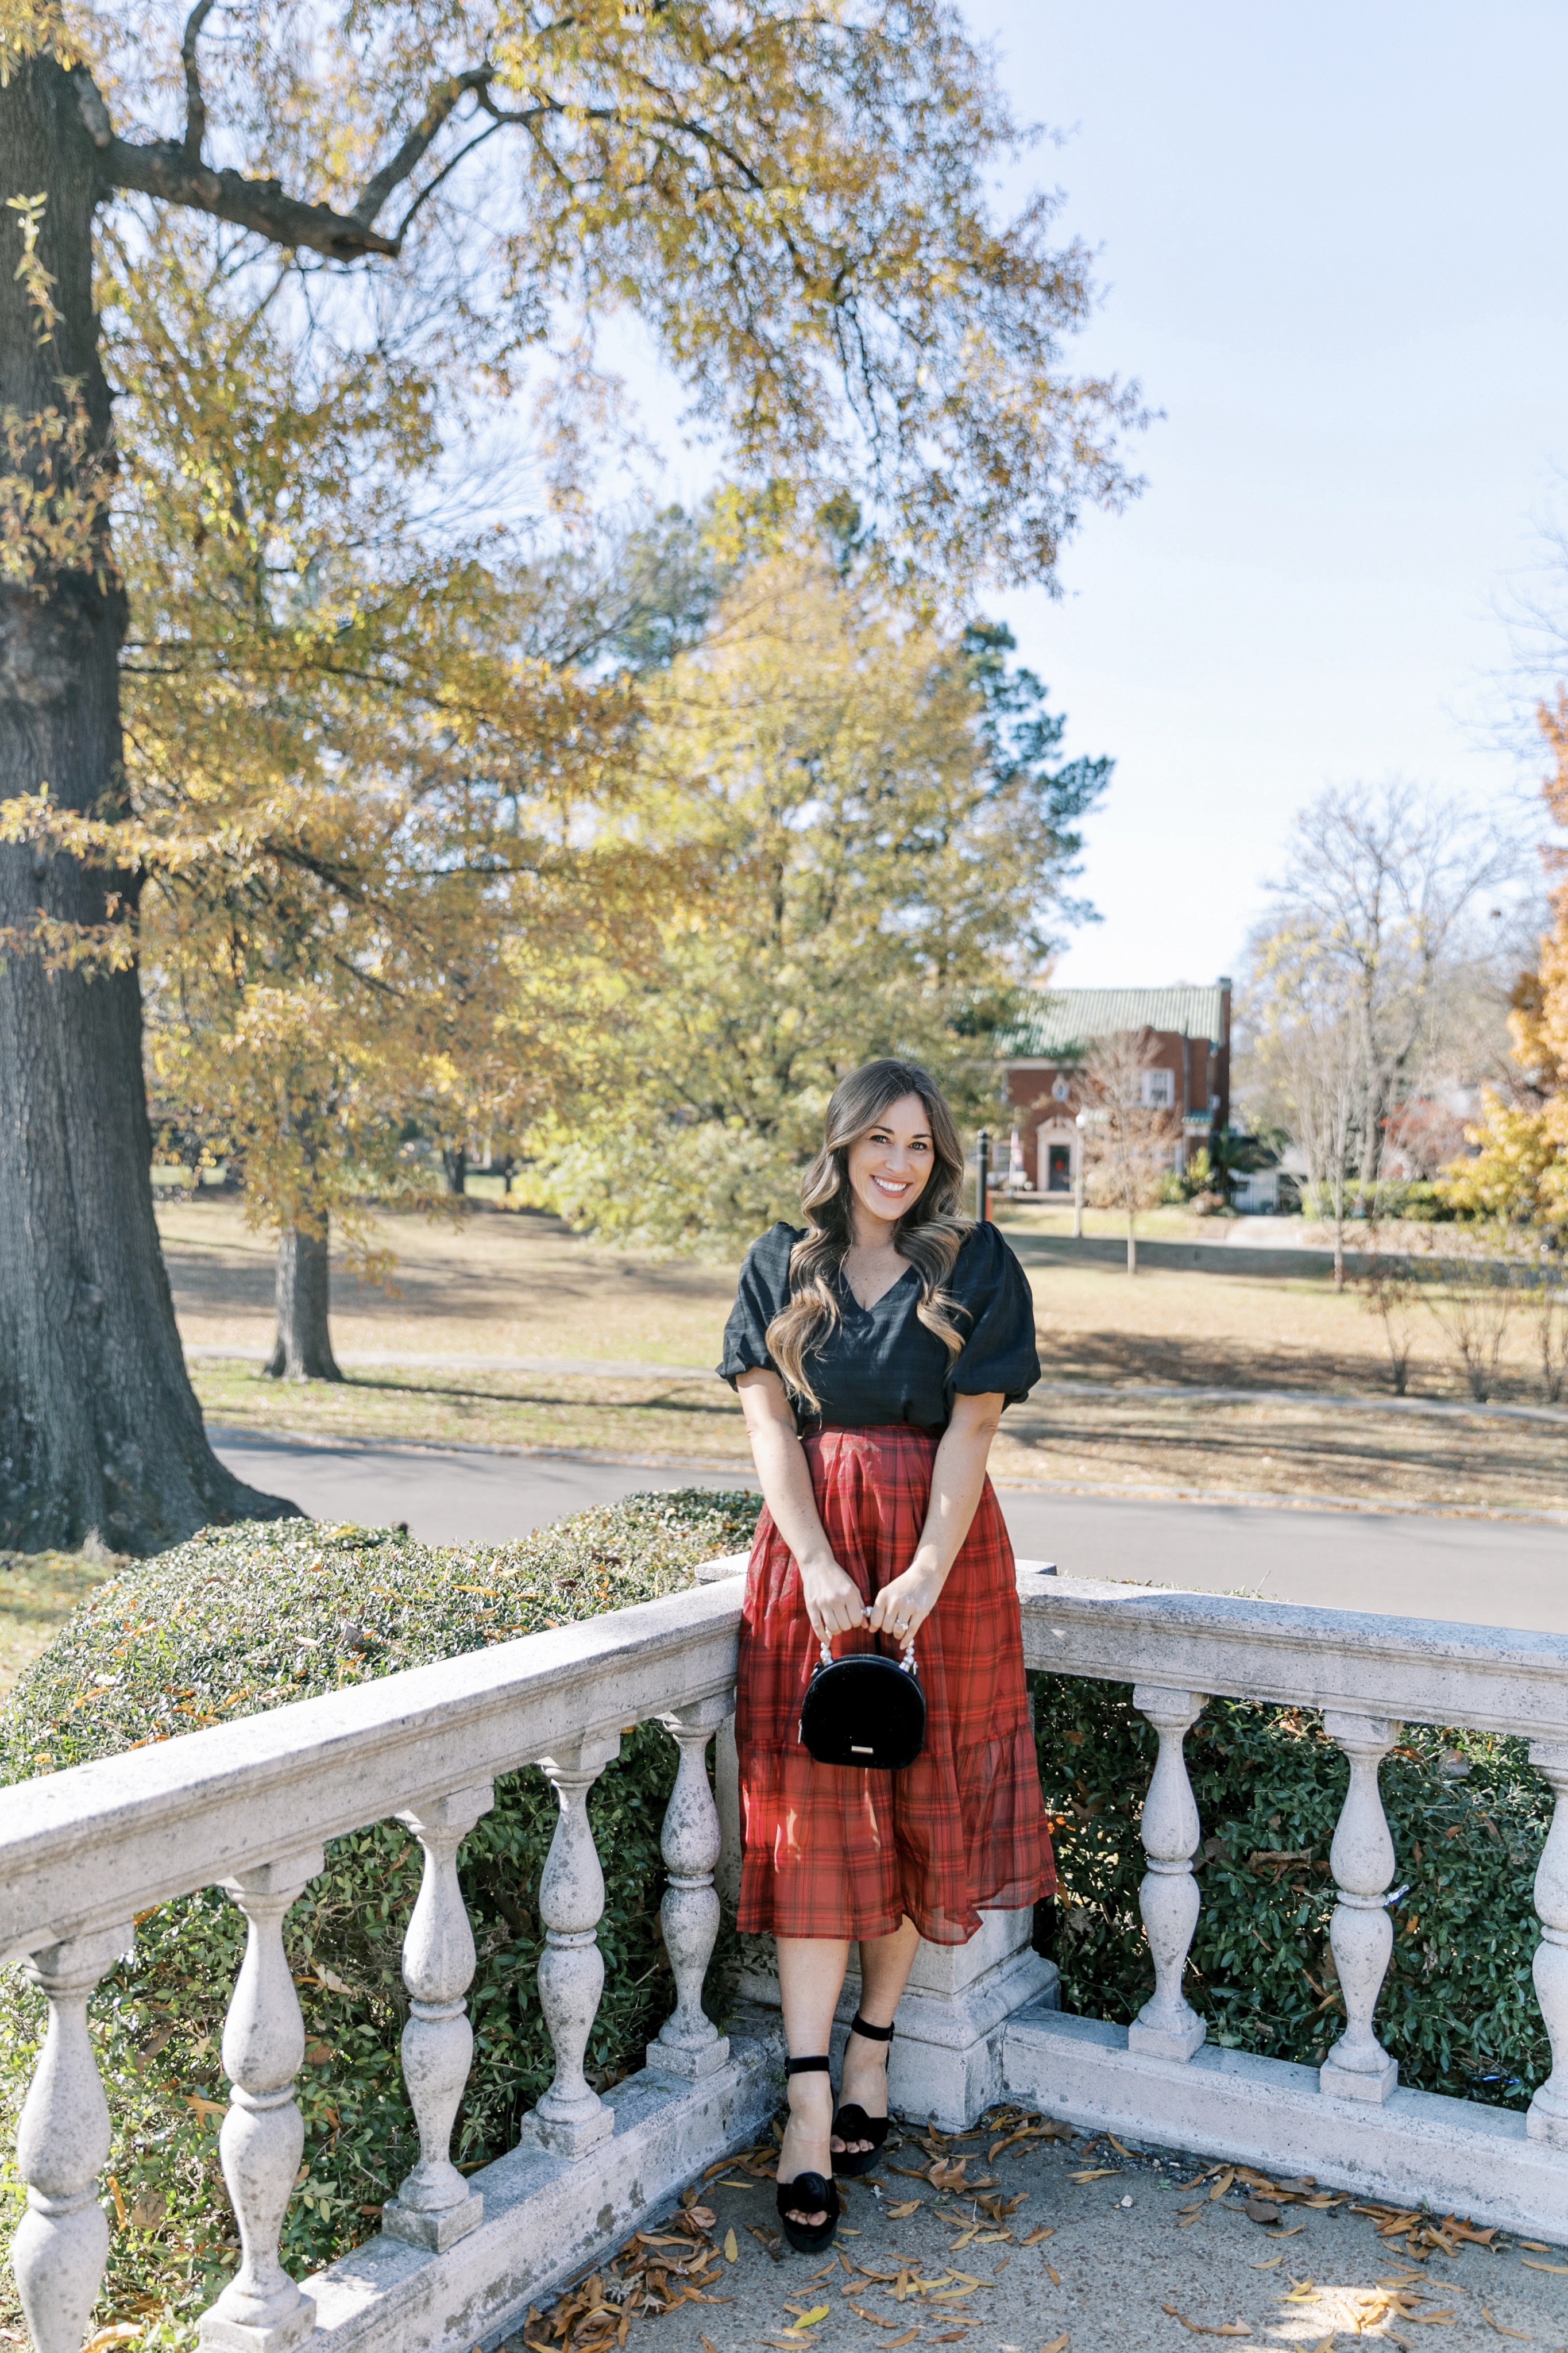 Trend Spin Linkup - Maxi Skirts & Dresses - Walking in Memphis in High Heels